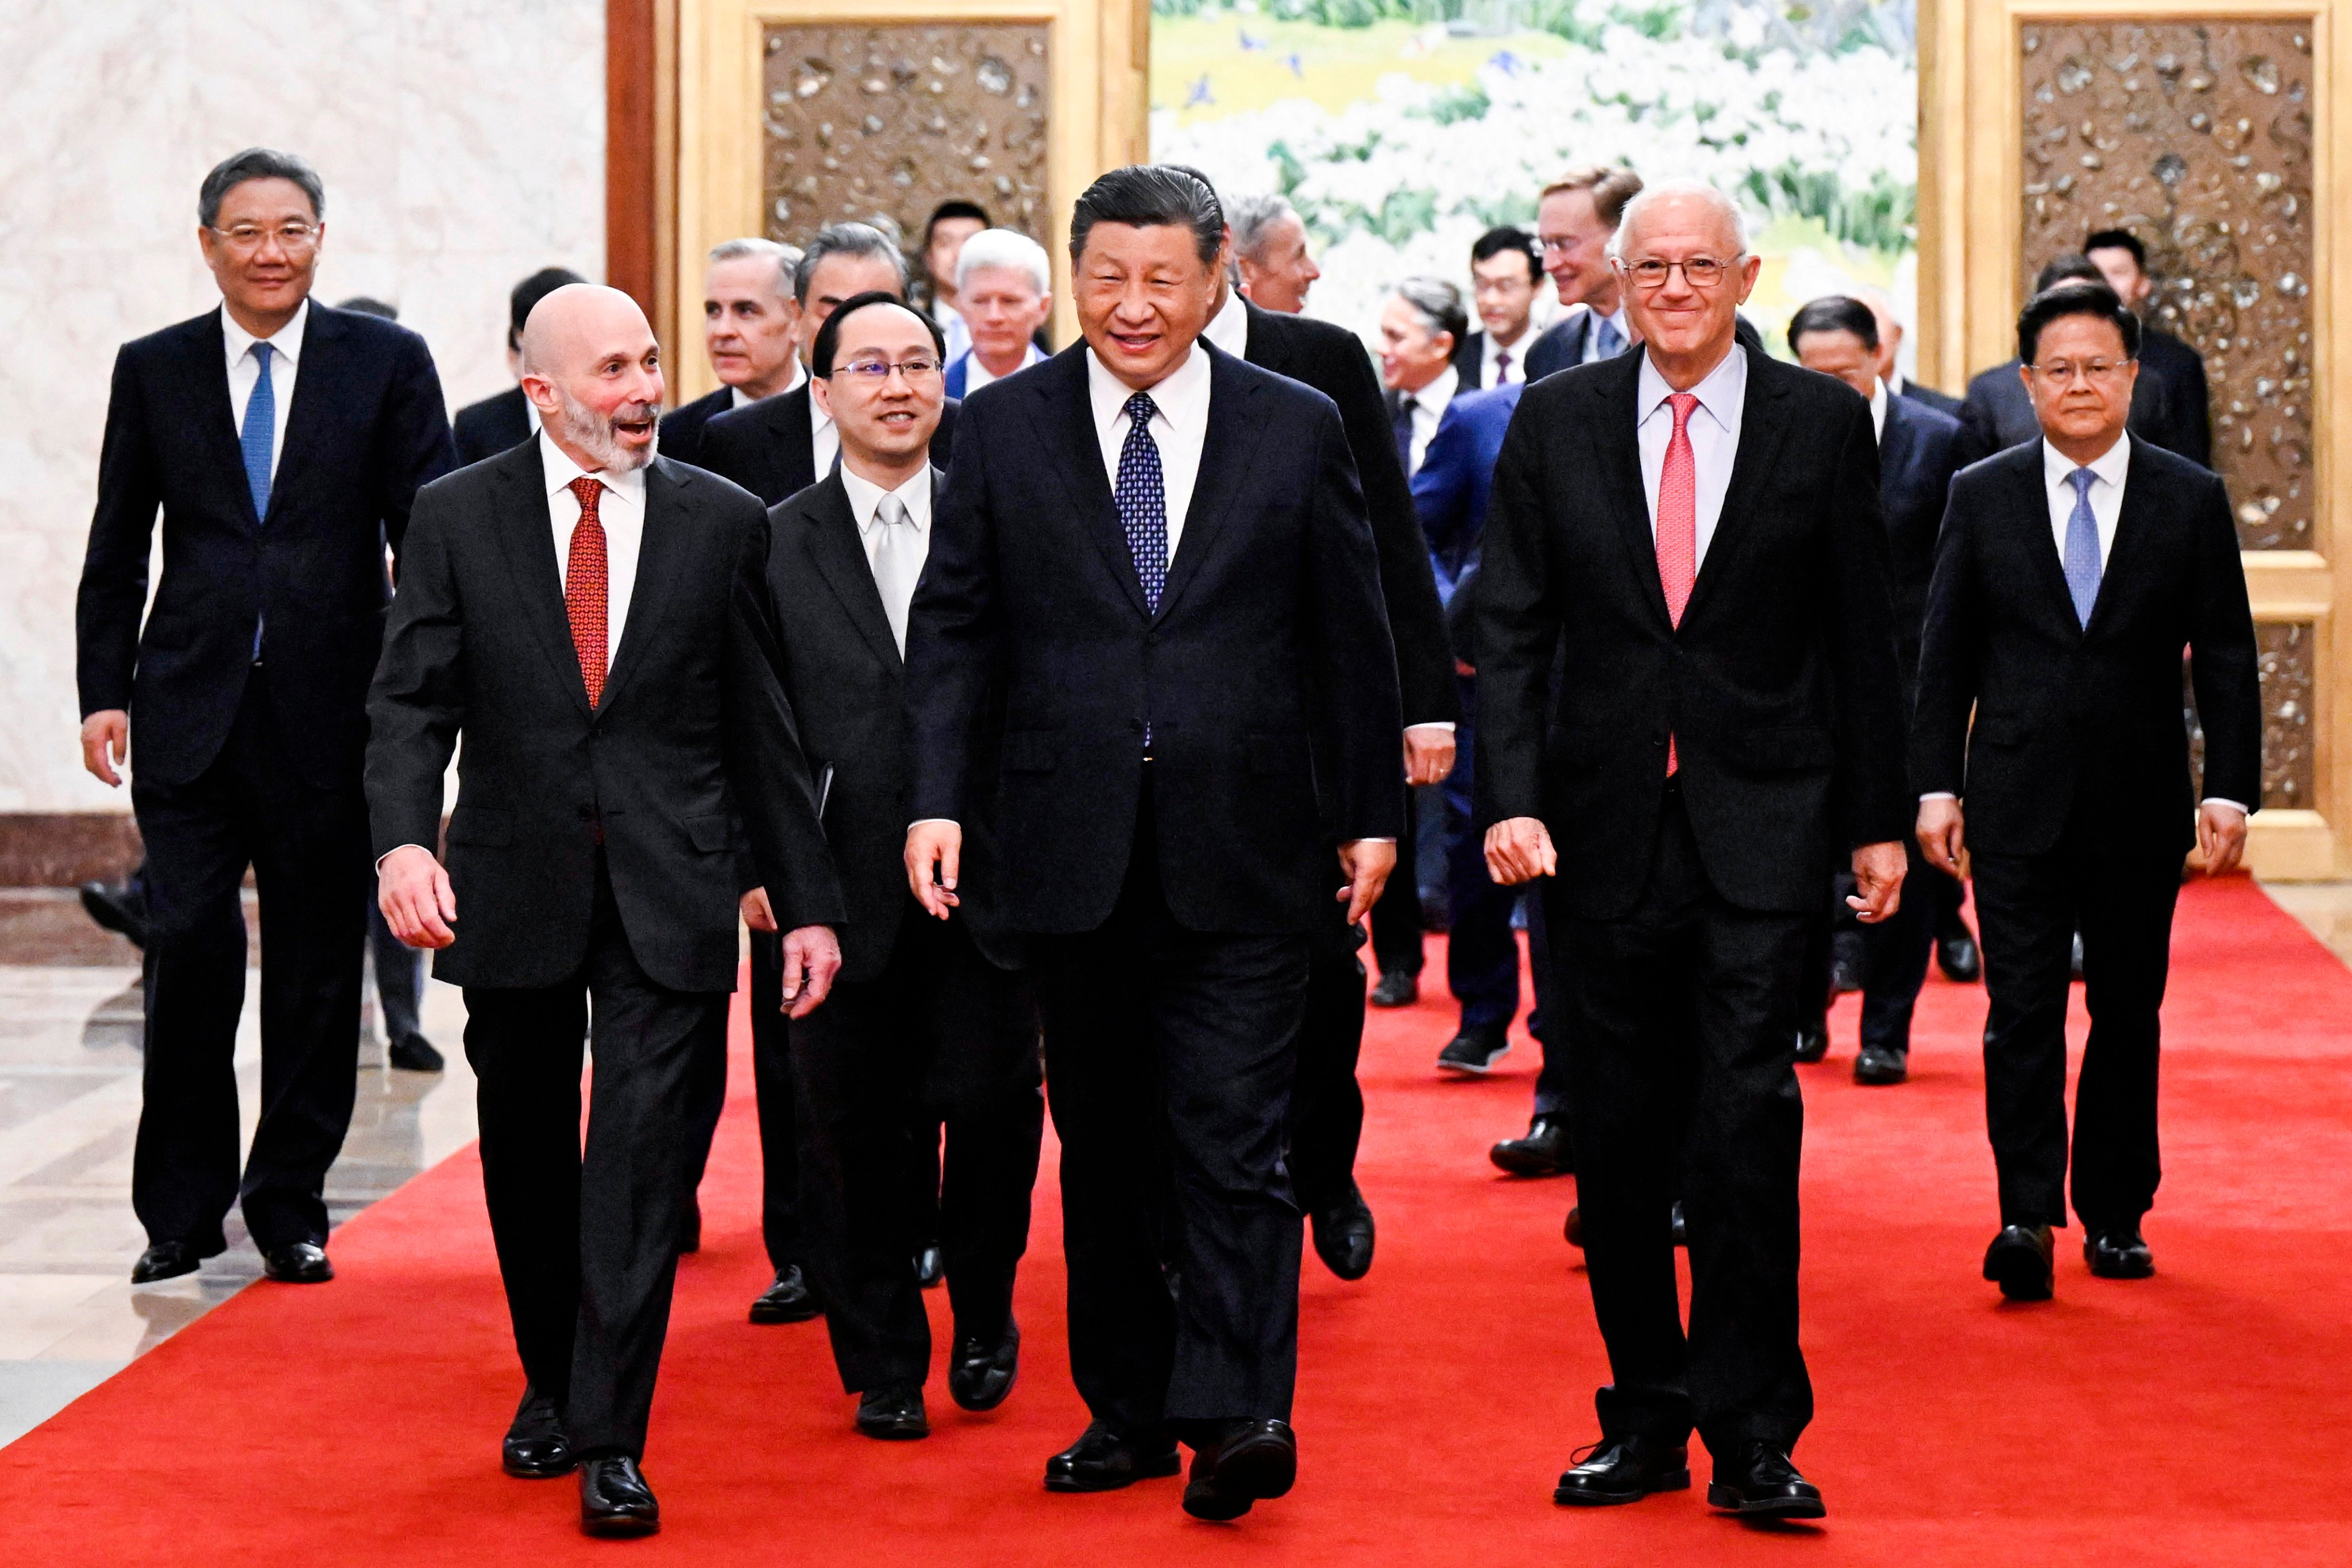 Chinese President Xi Jinping, centre, walks with representatives from US business, strategic and academic communities at the Great Hall of the People in Beijing on March 27. Xi promised the delegation more policy support to improve the business environment. Photo: Xinhua via AP